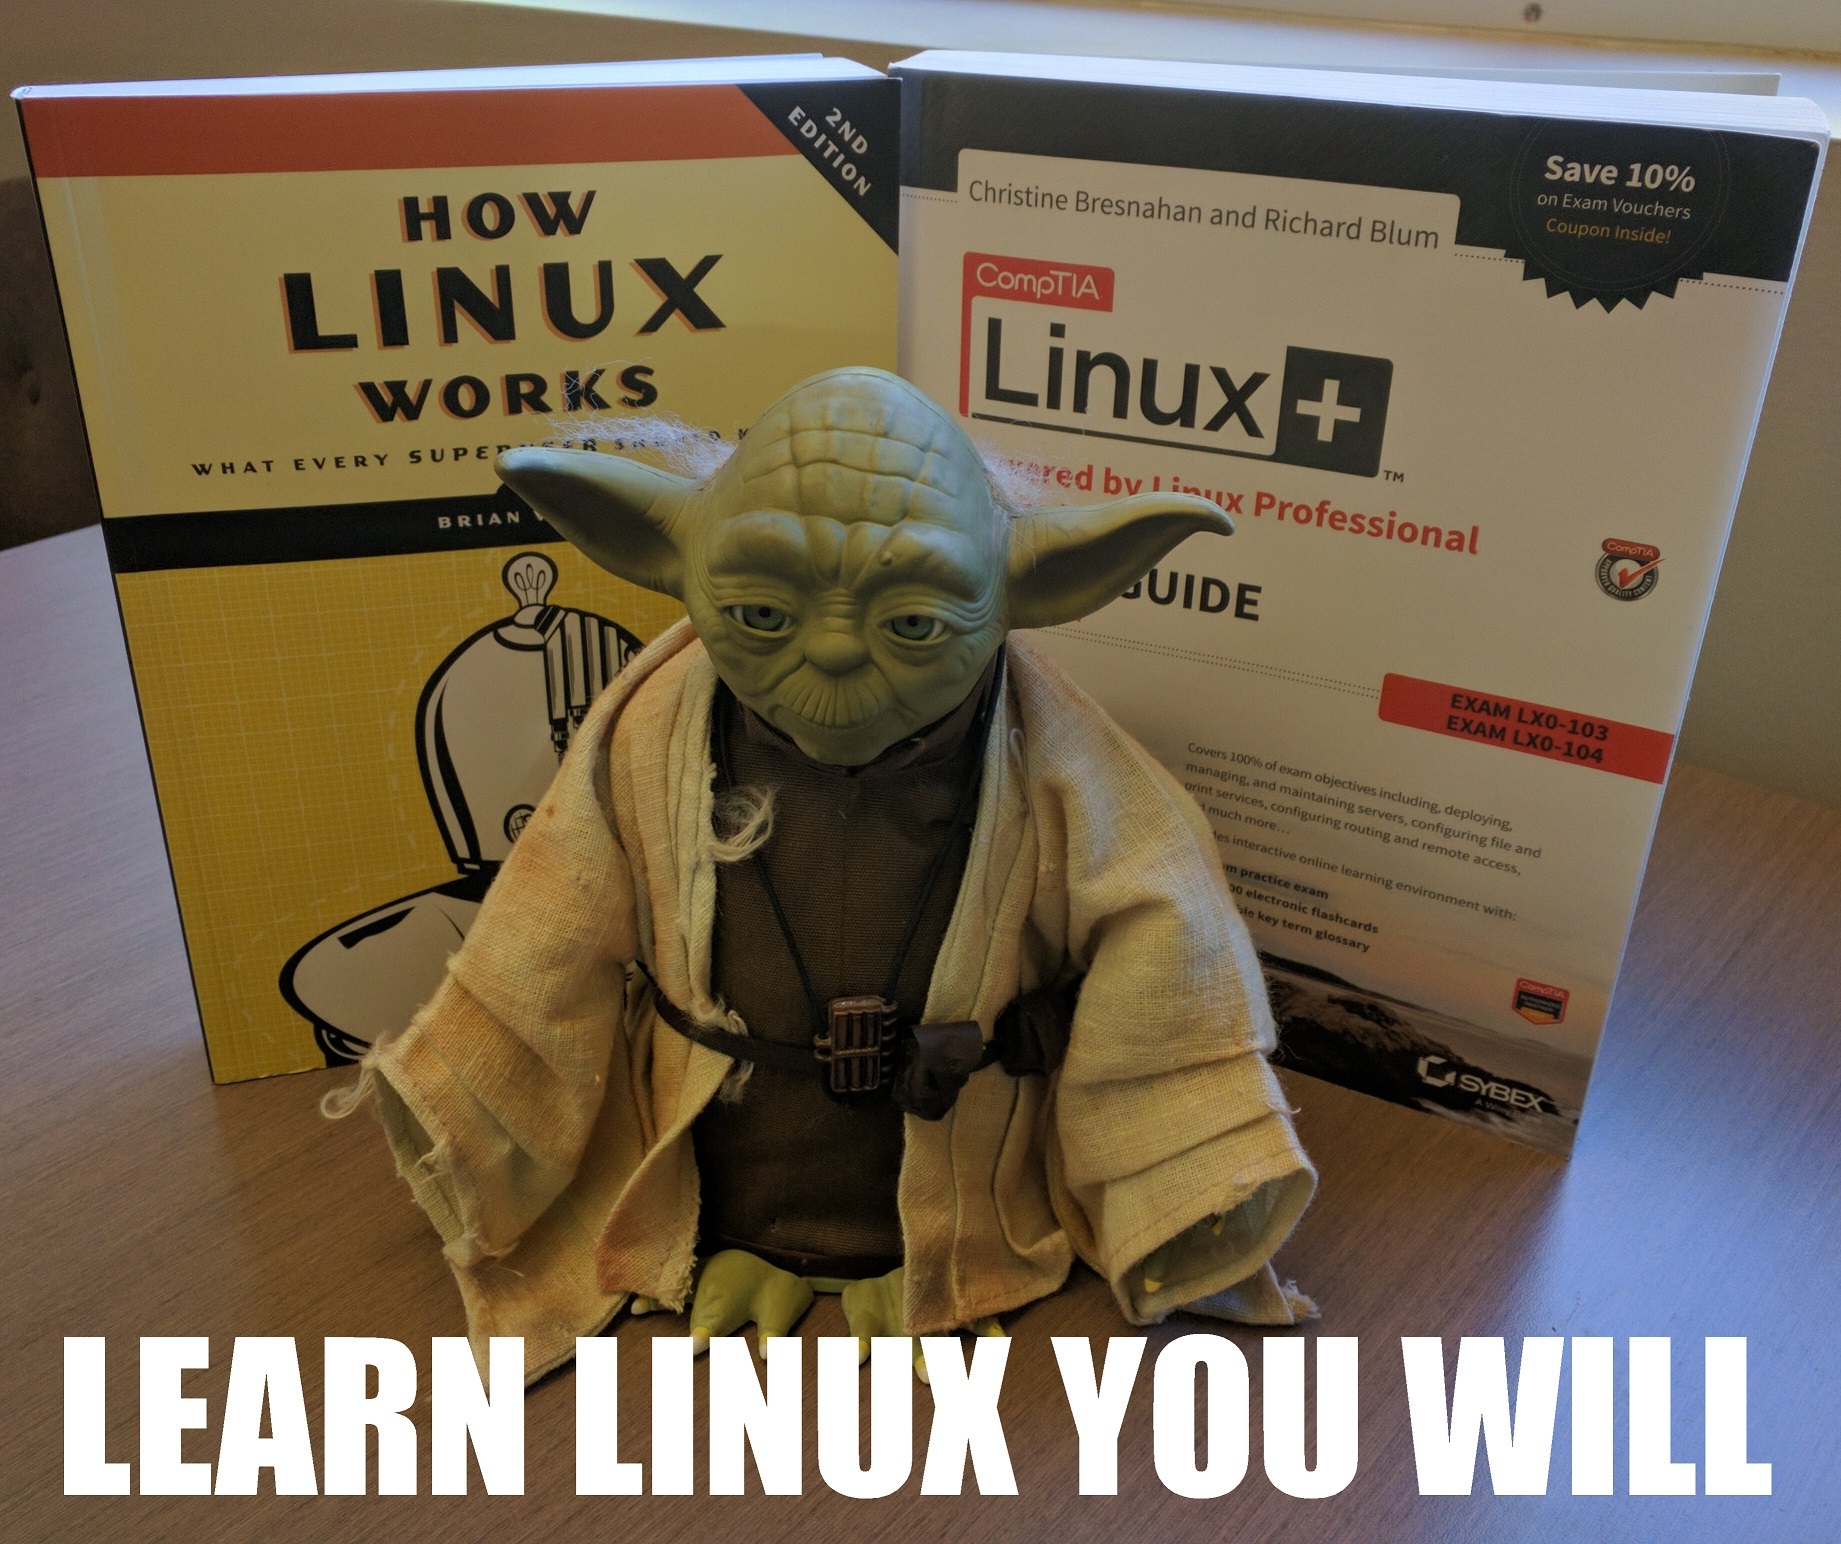 Learn Linux you will. Do or do not, there is no try.